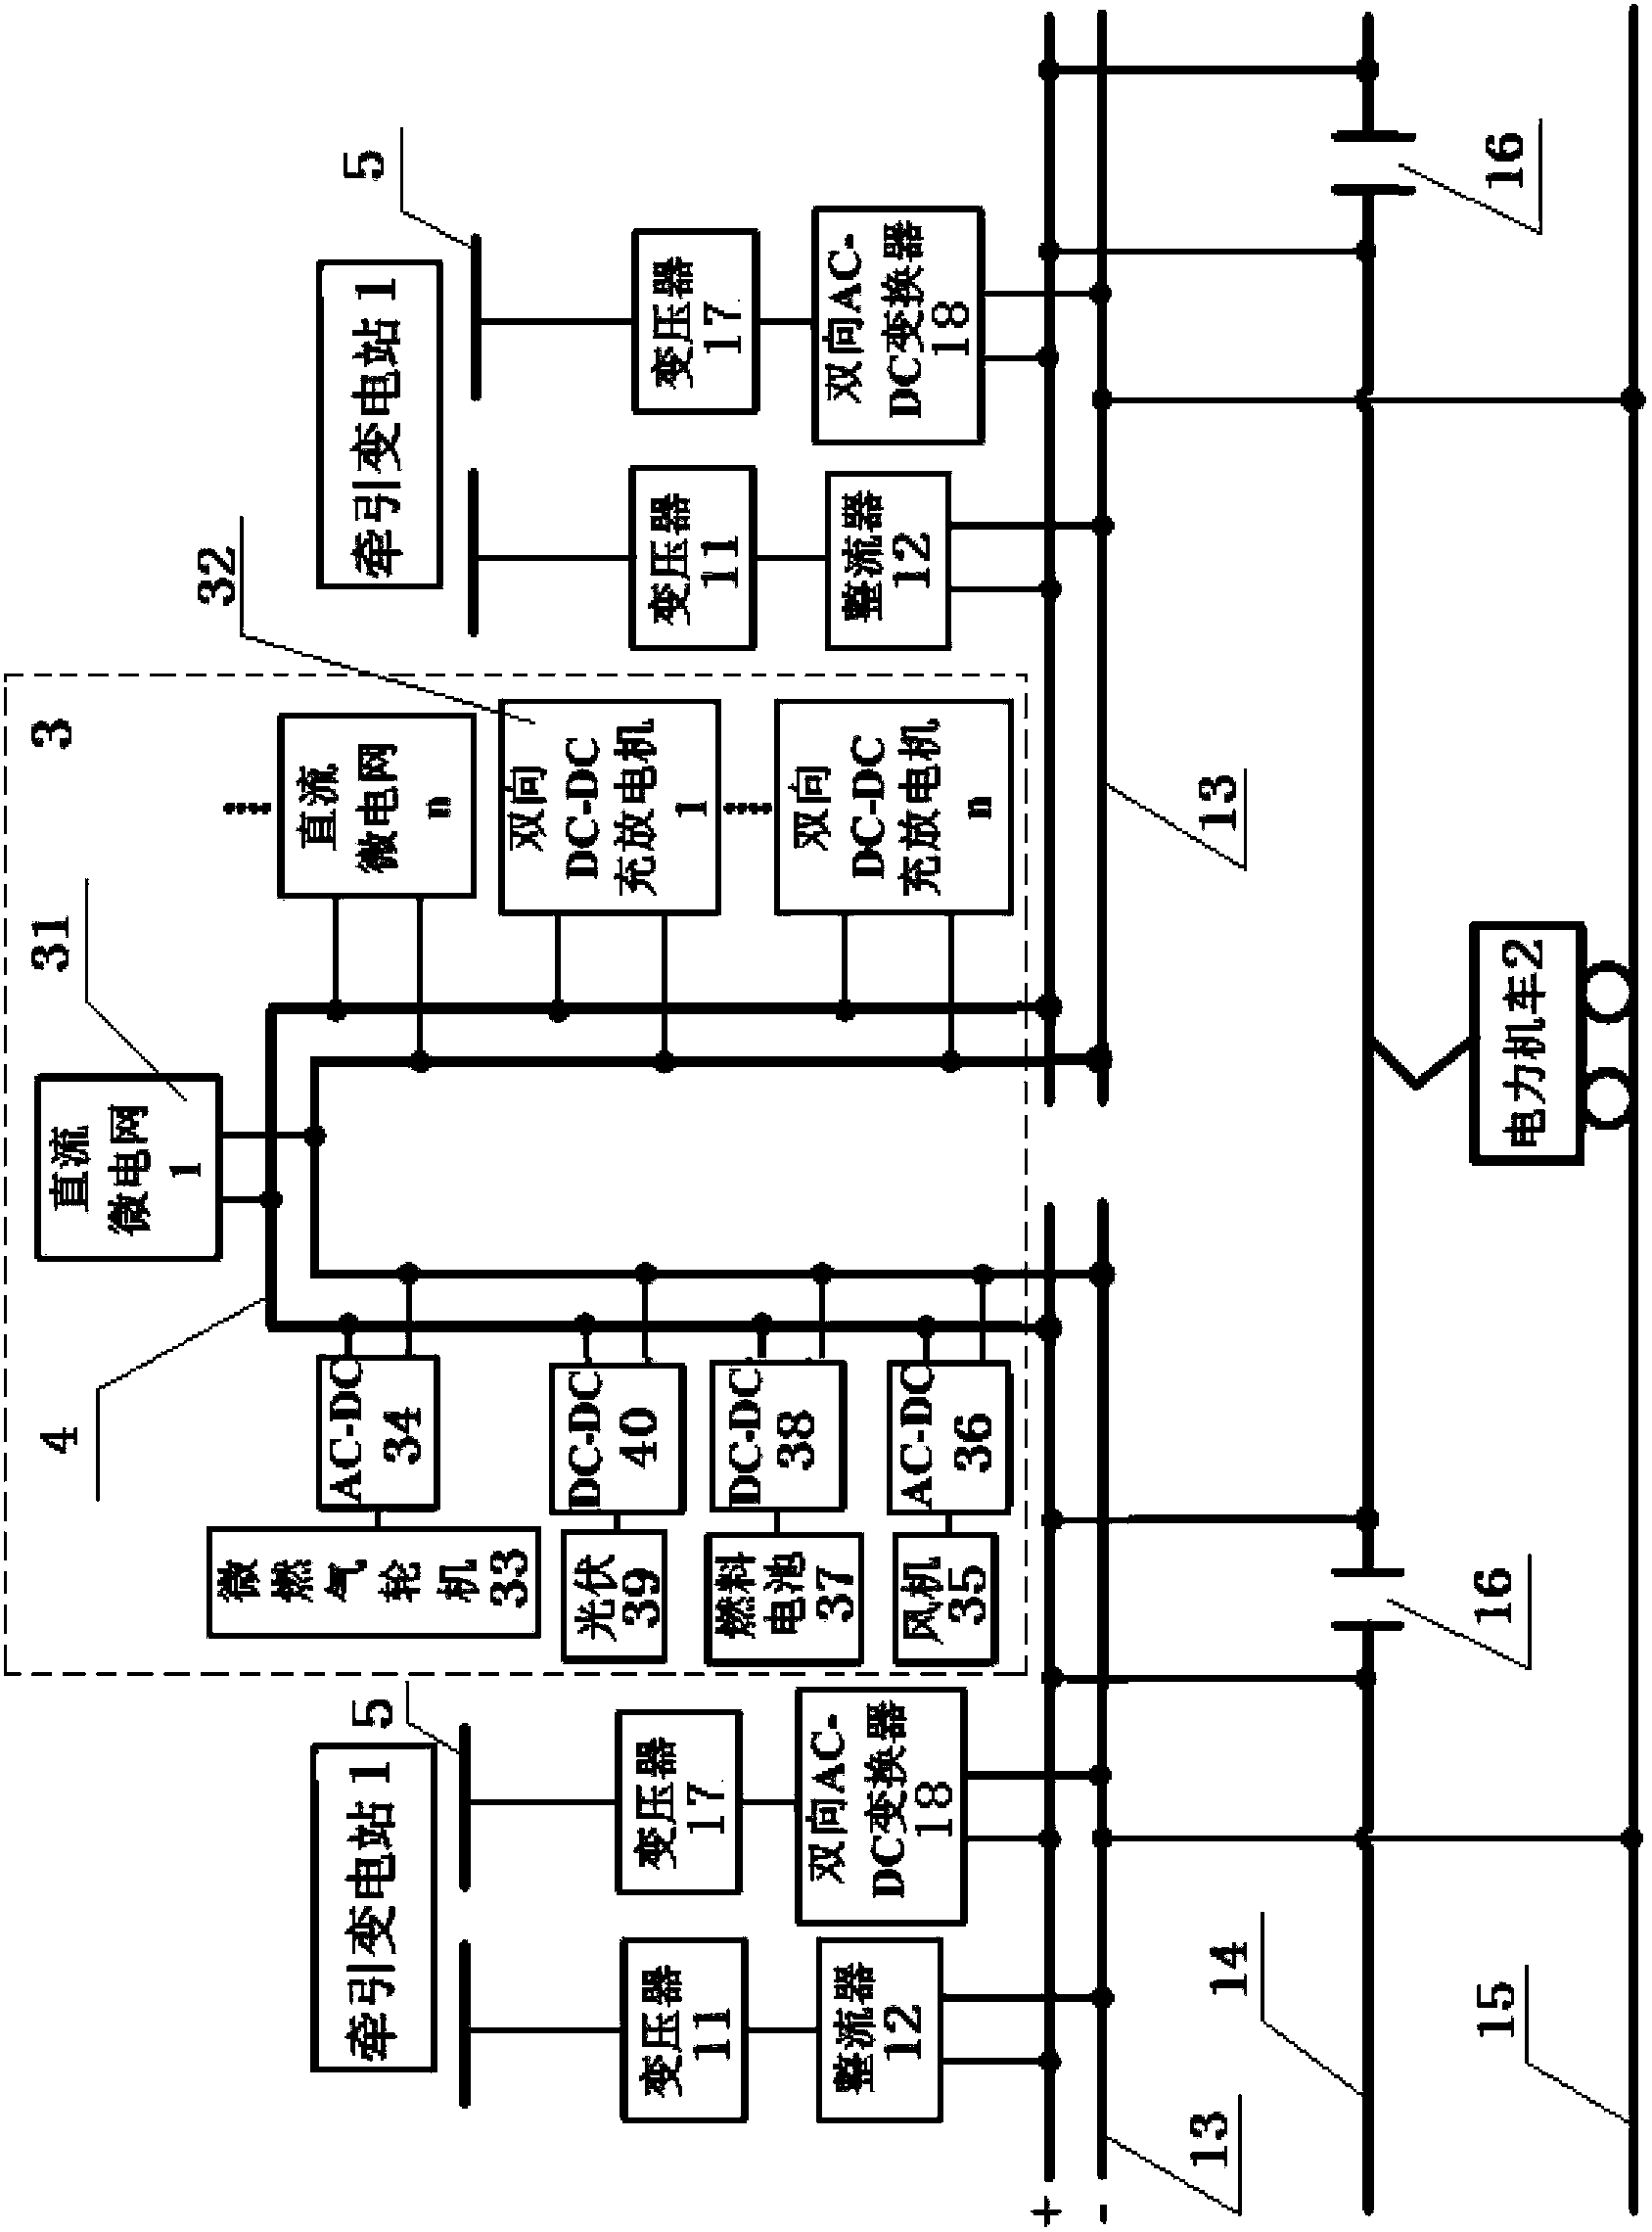 New energy-based hybrid bidirectional interactive direct-current traction power supply system